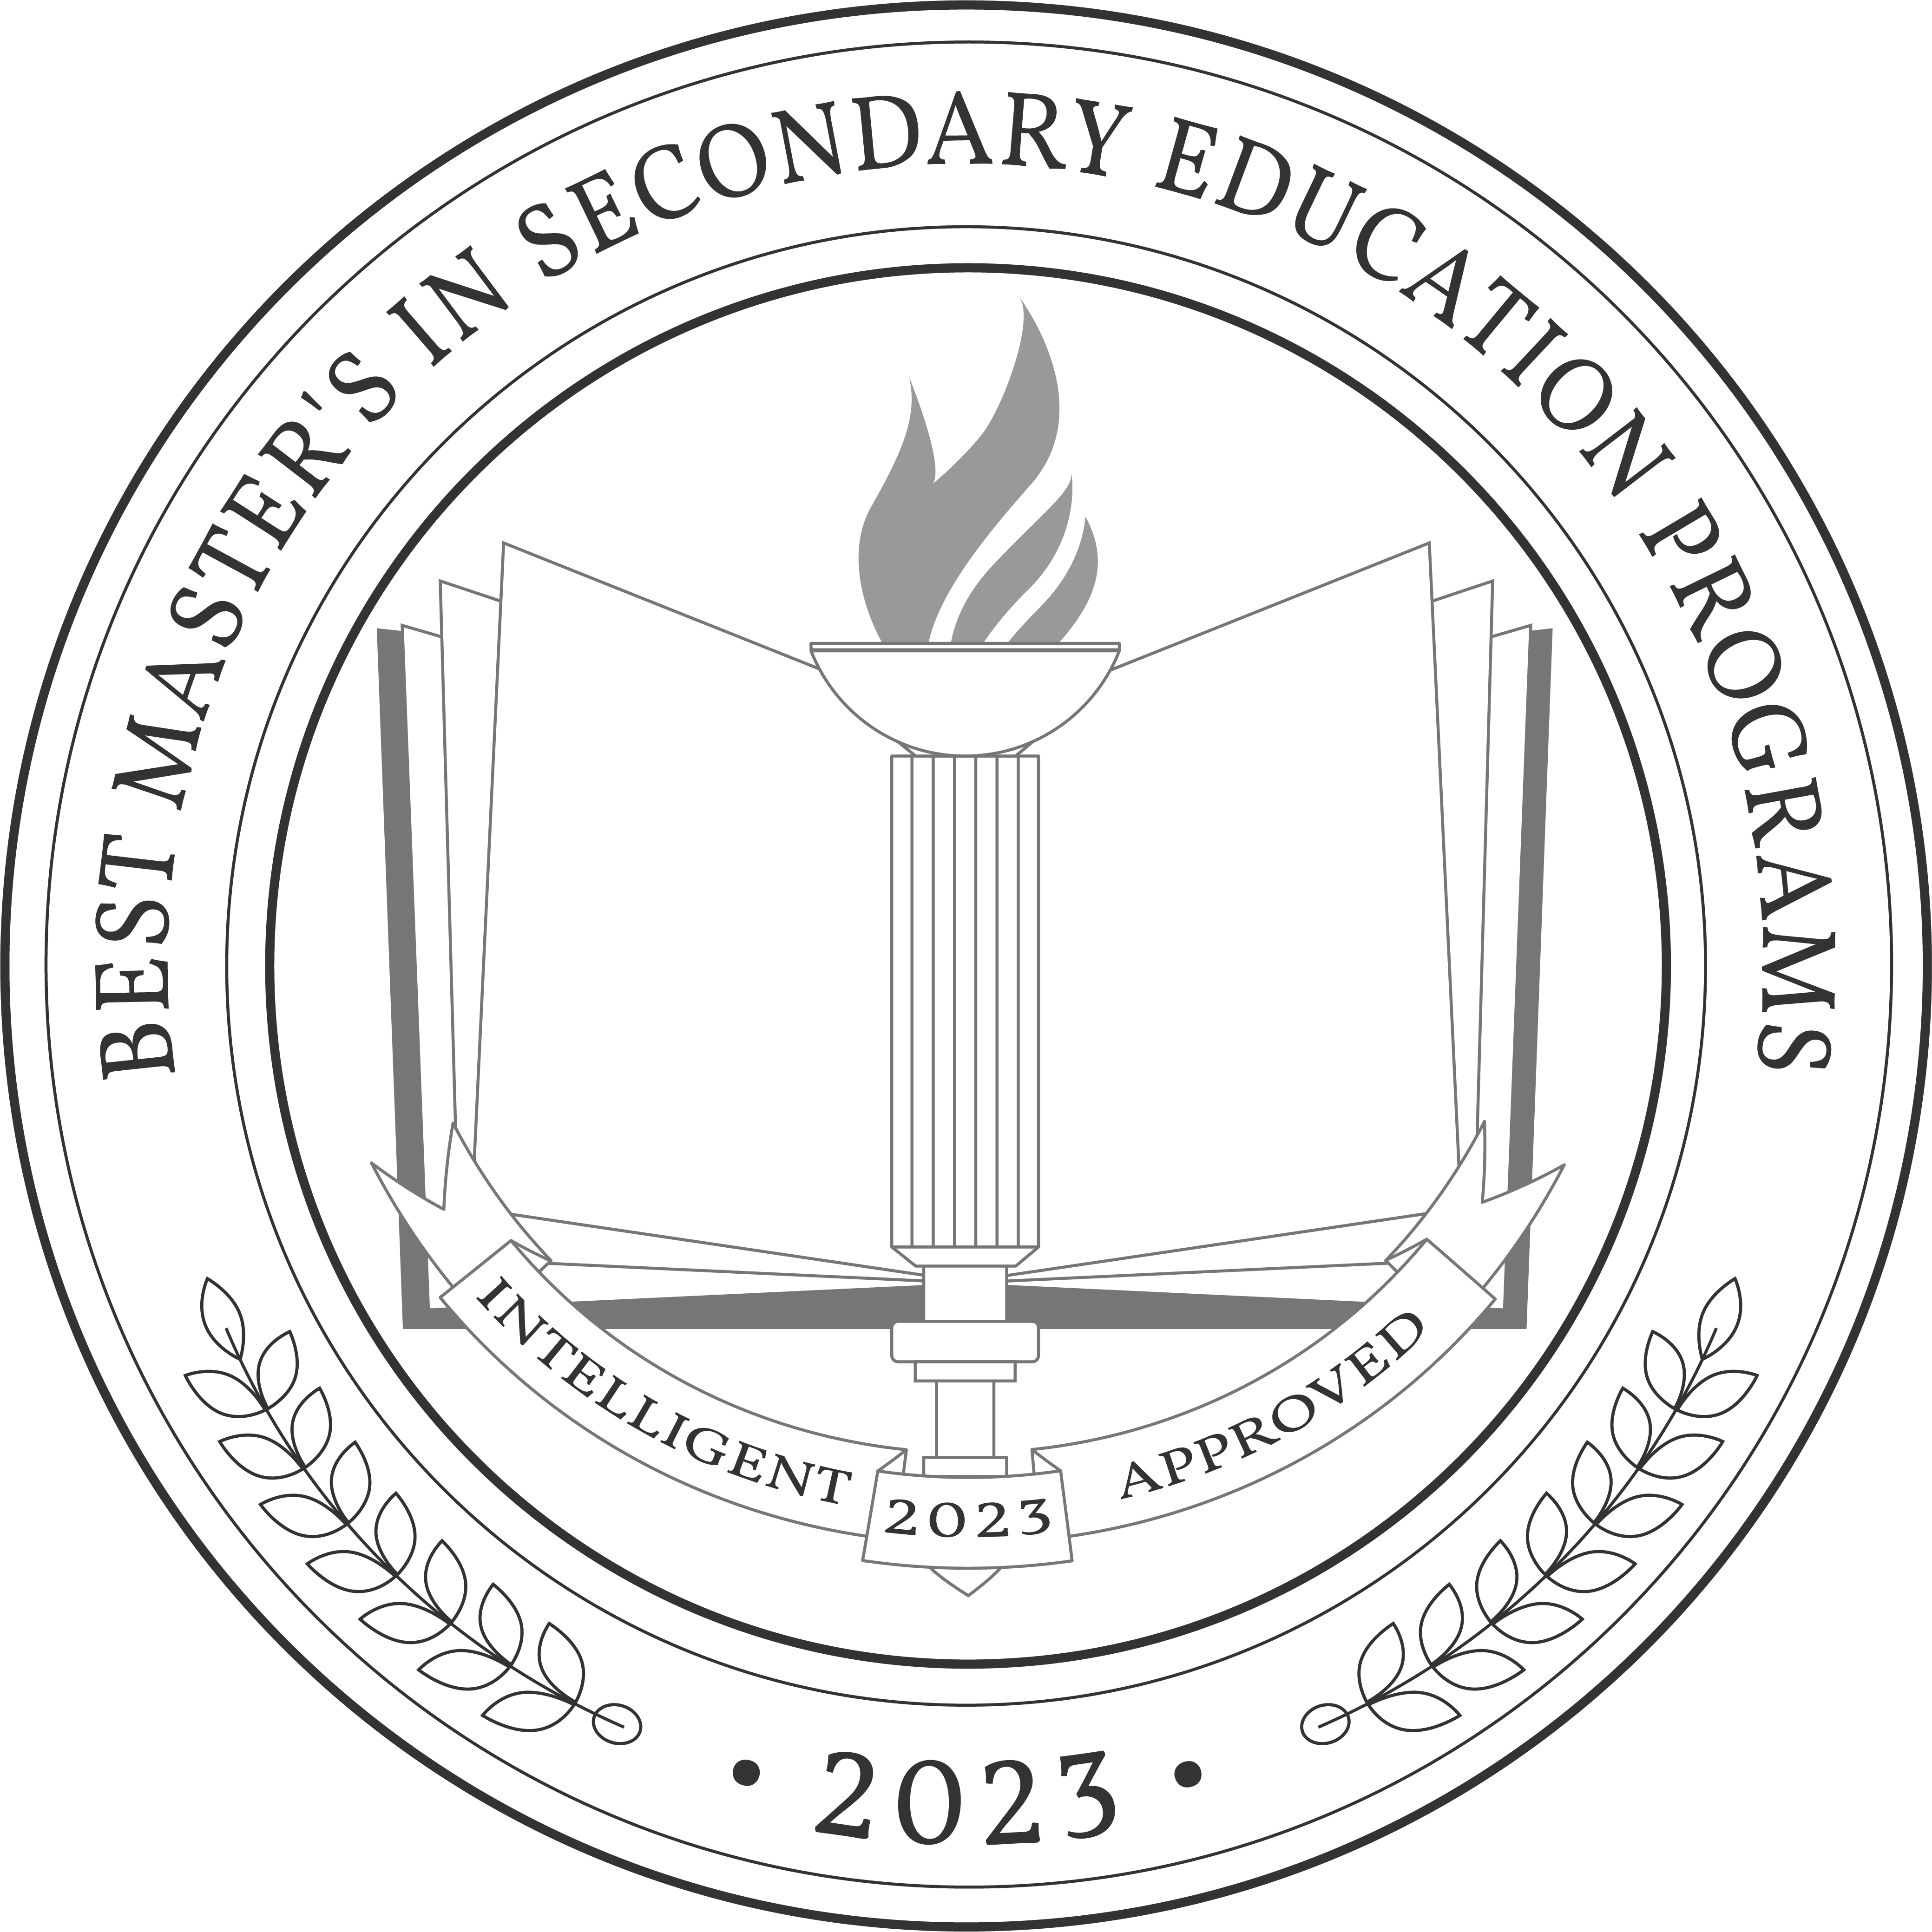 Best Master's in Secondary Education Programs badge